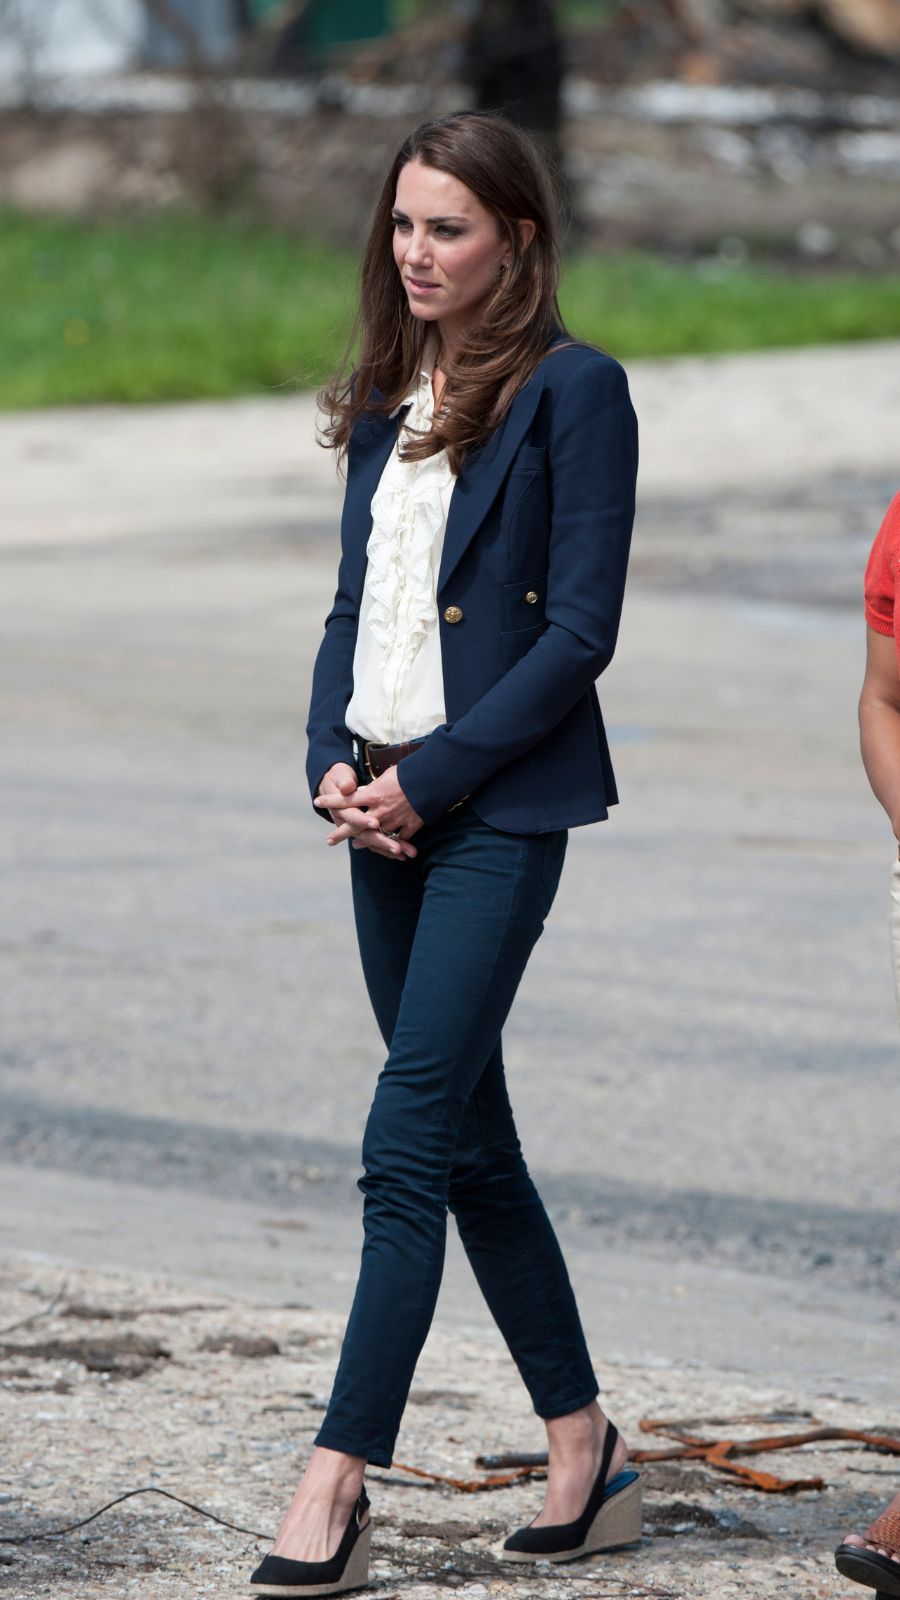 Where to buy Kate Middleton's wedges | Woman & Home